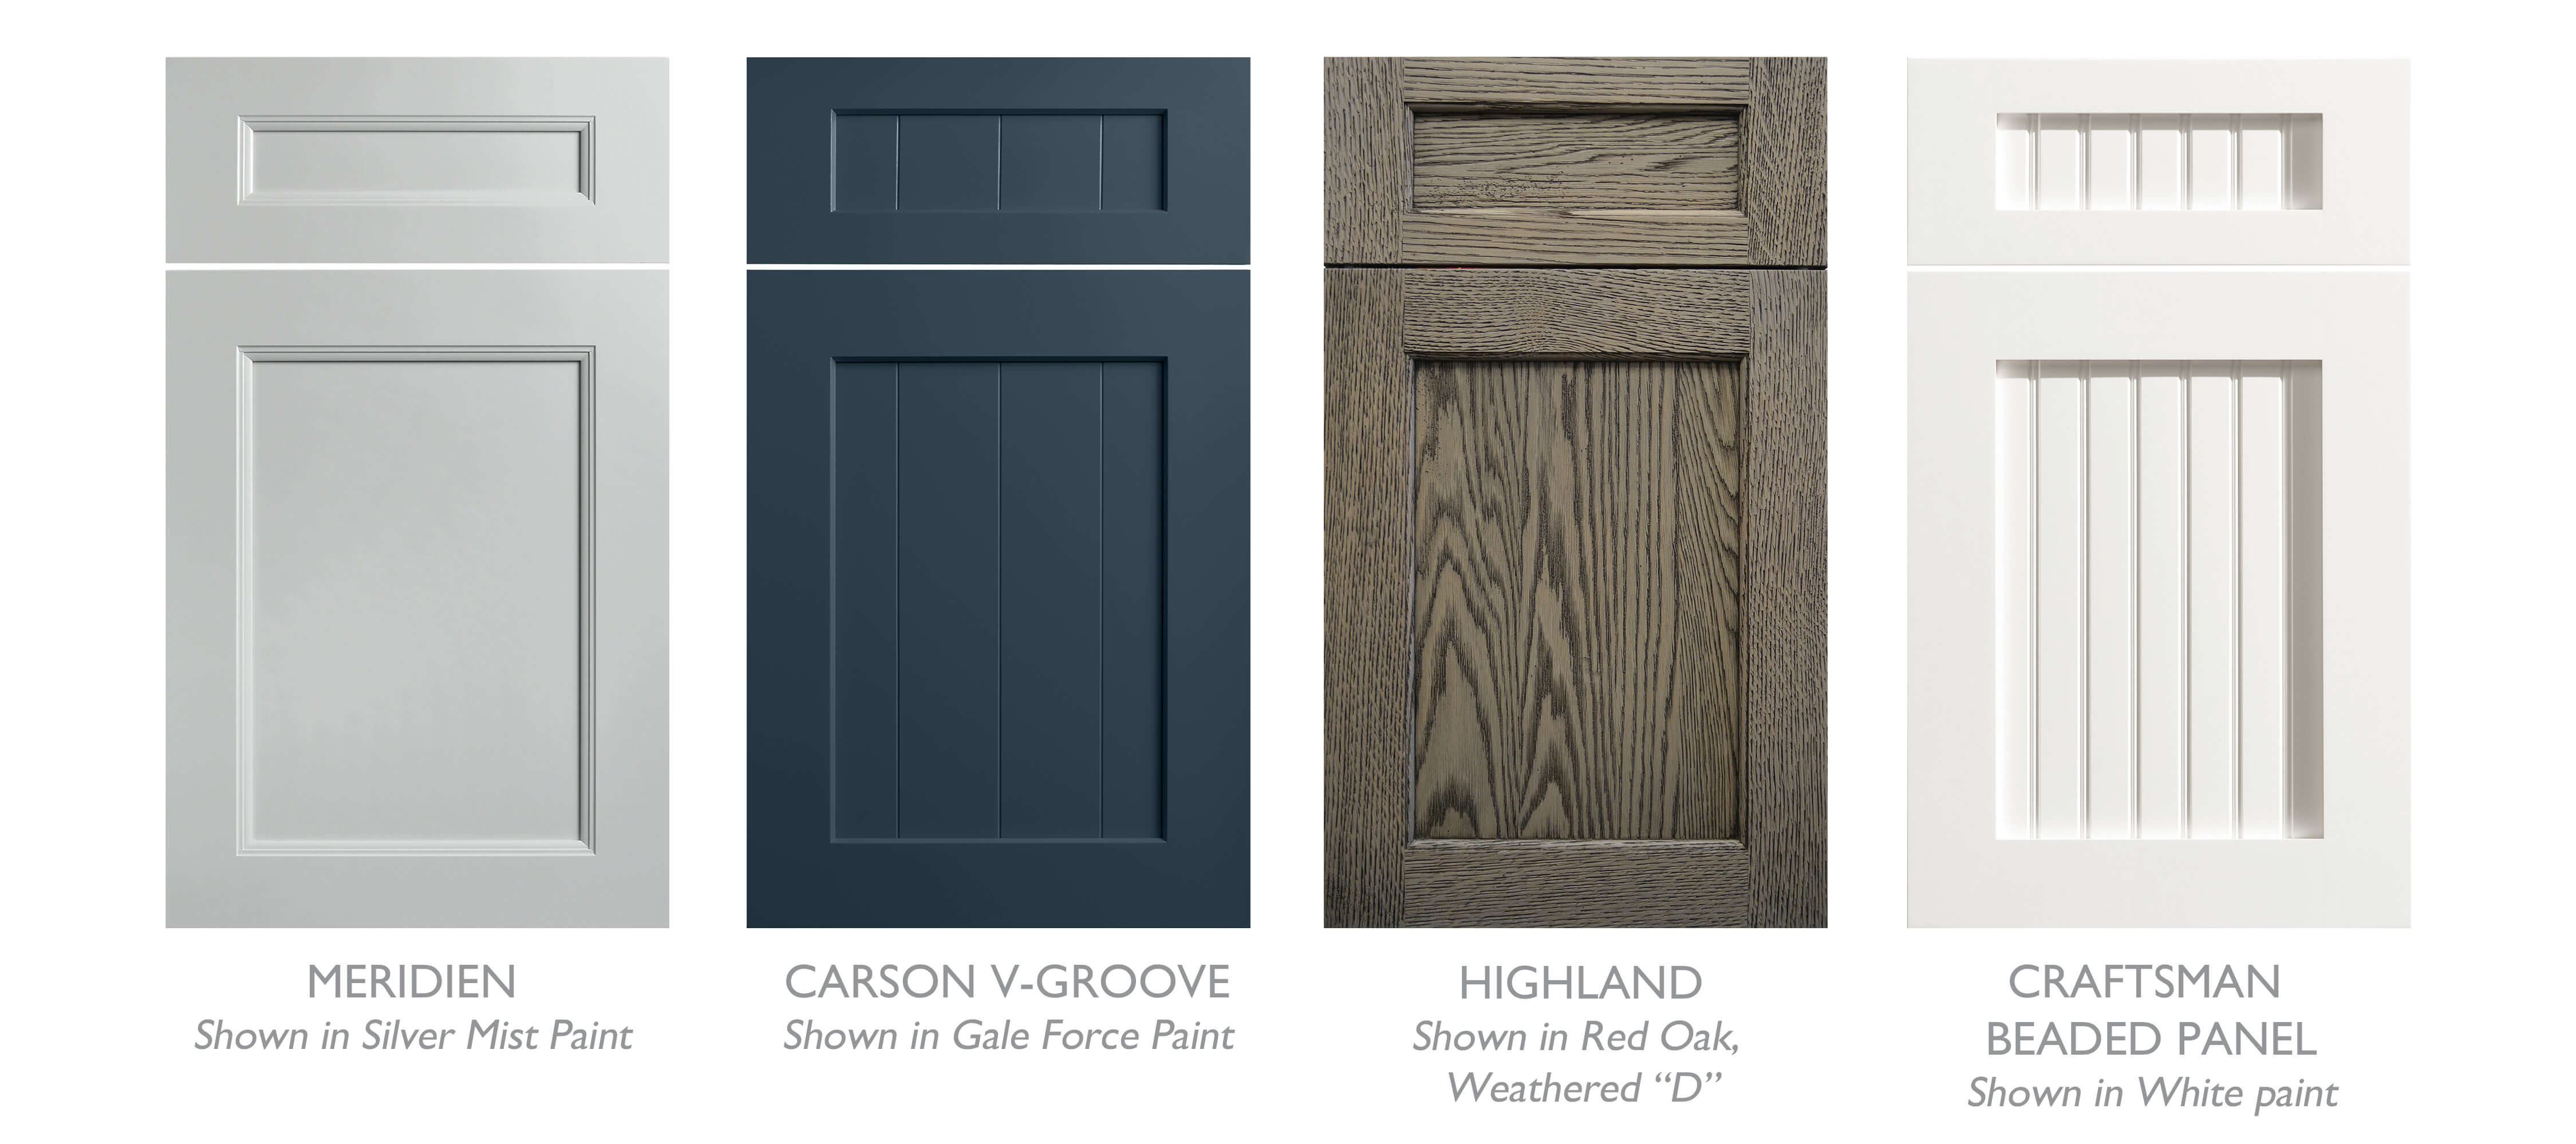 Examples of Nautical style cabinet door styles for kitchen and bath designs.